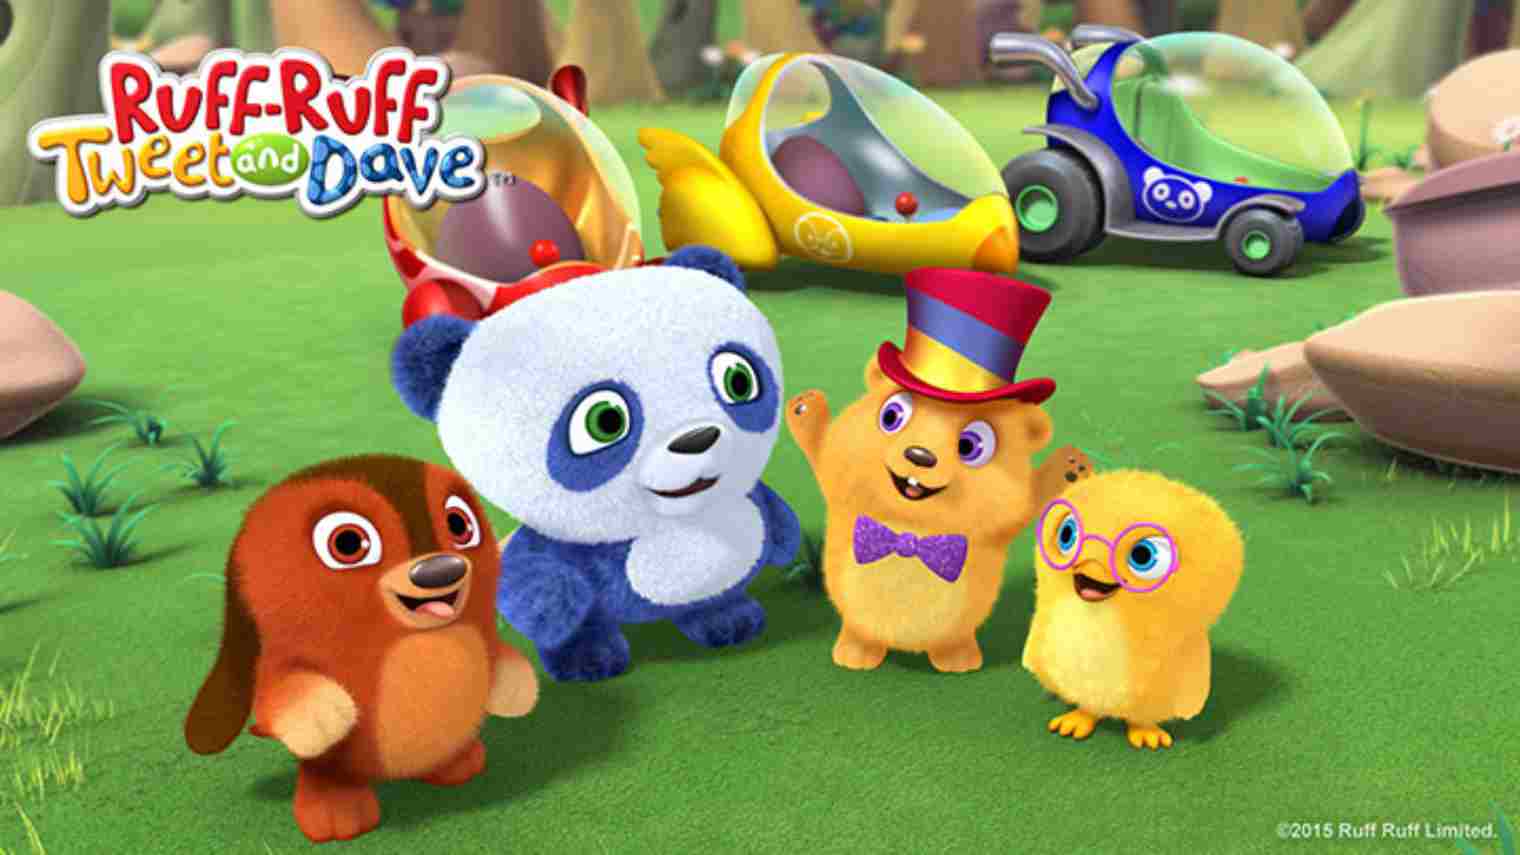 Ruff-Ruff, Tweet and Dave premieres this holiday weekend on Sprout! 